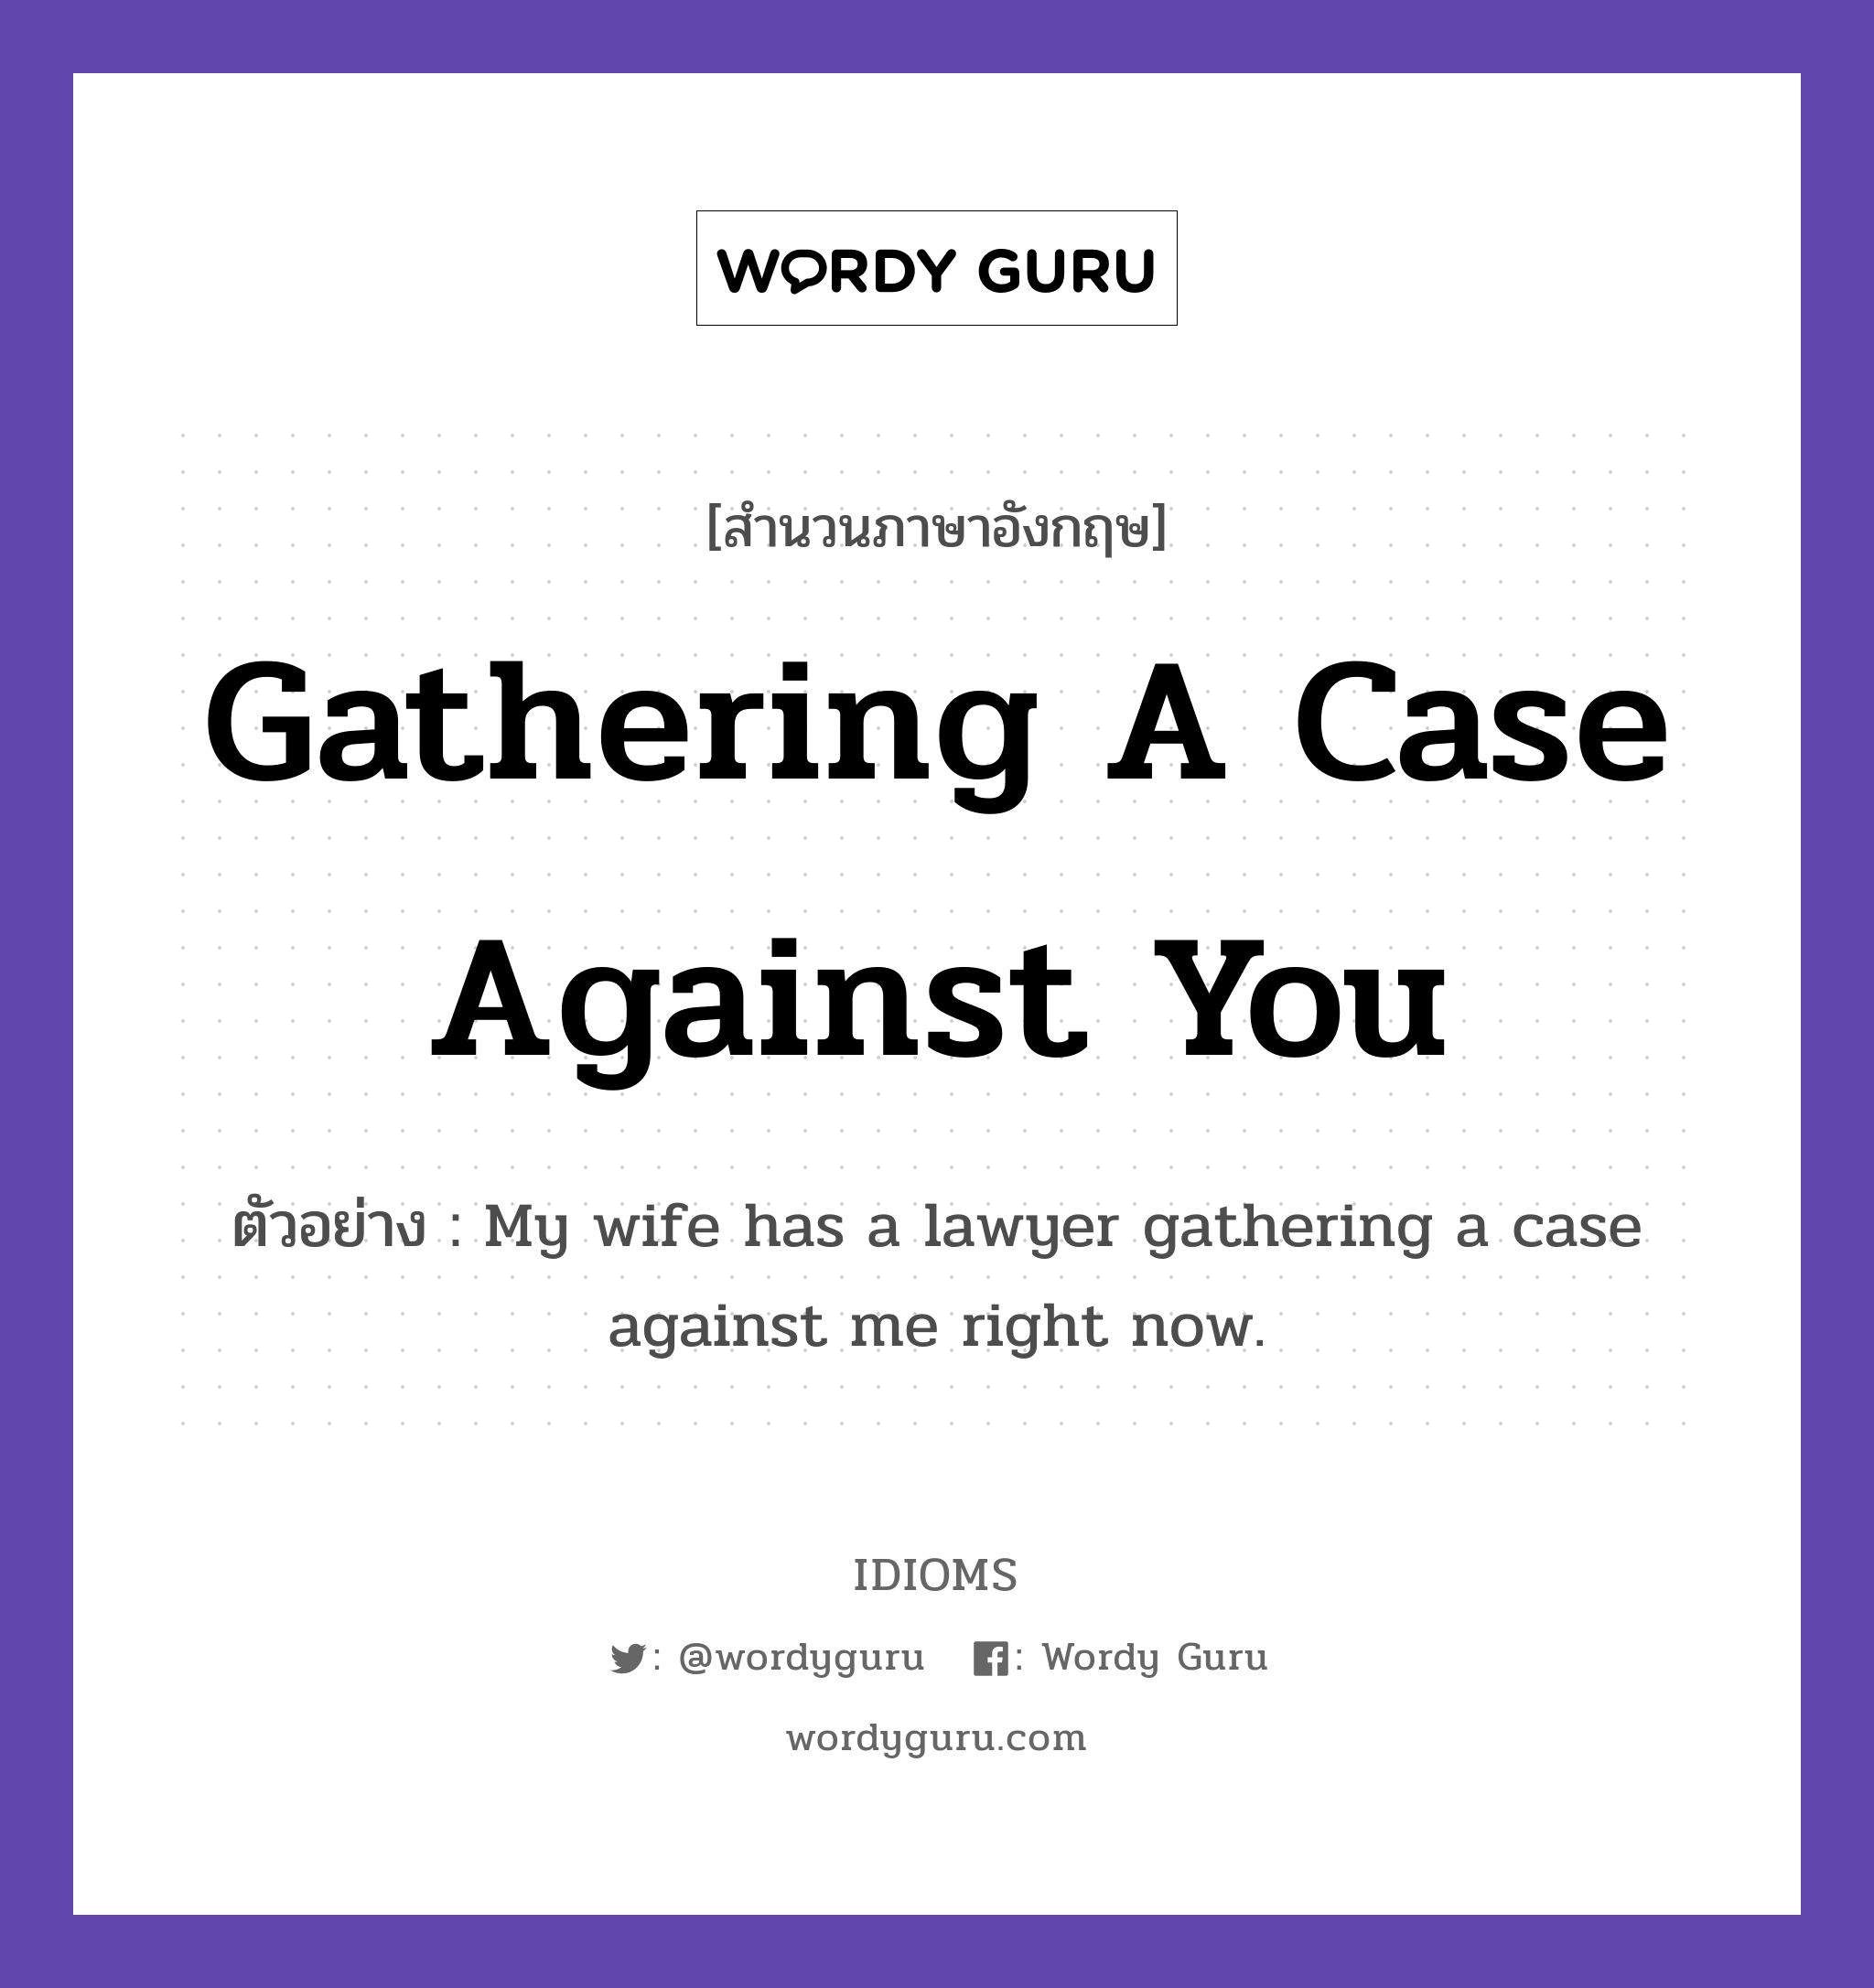 Gathering A Case Against You แปลว่า?, สำนวนภาษาอังกฤษ Gathering A Case Against You ตัวอย่าง My wife has a lawyer gathering a case against me right now.